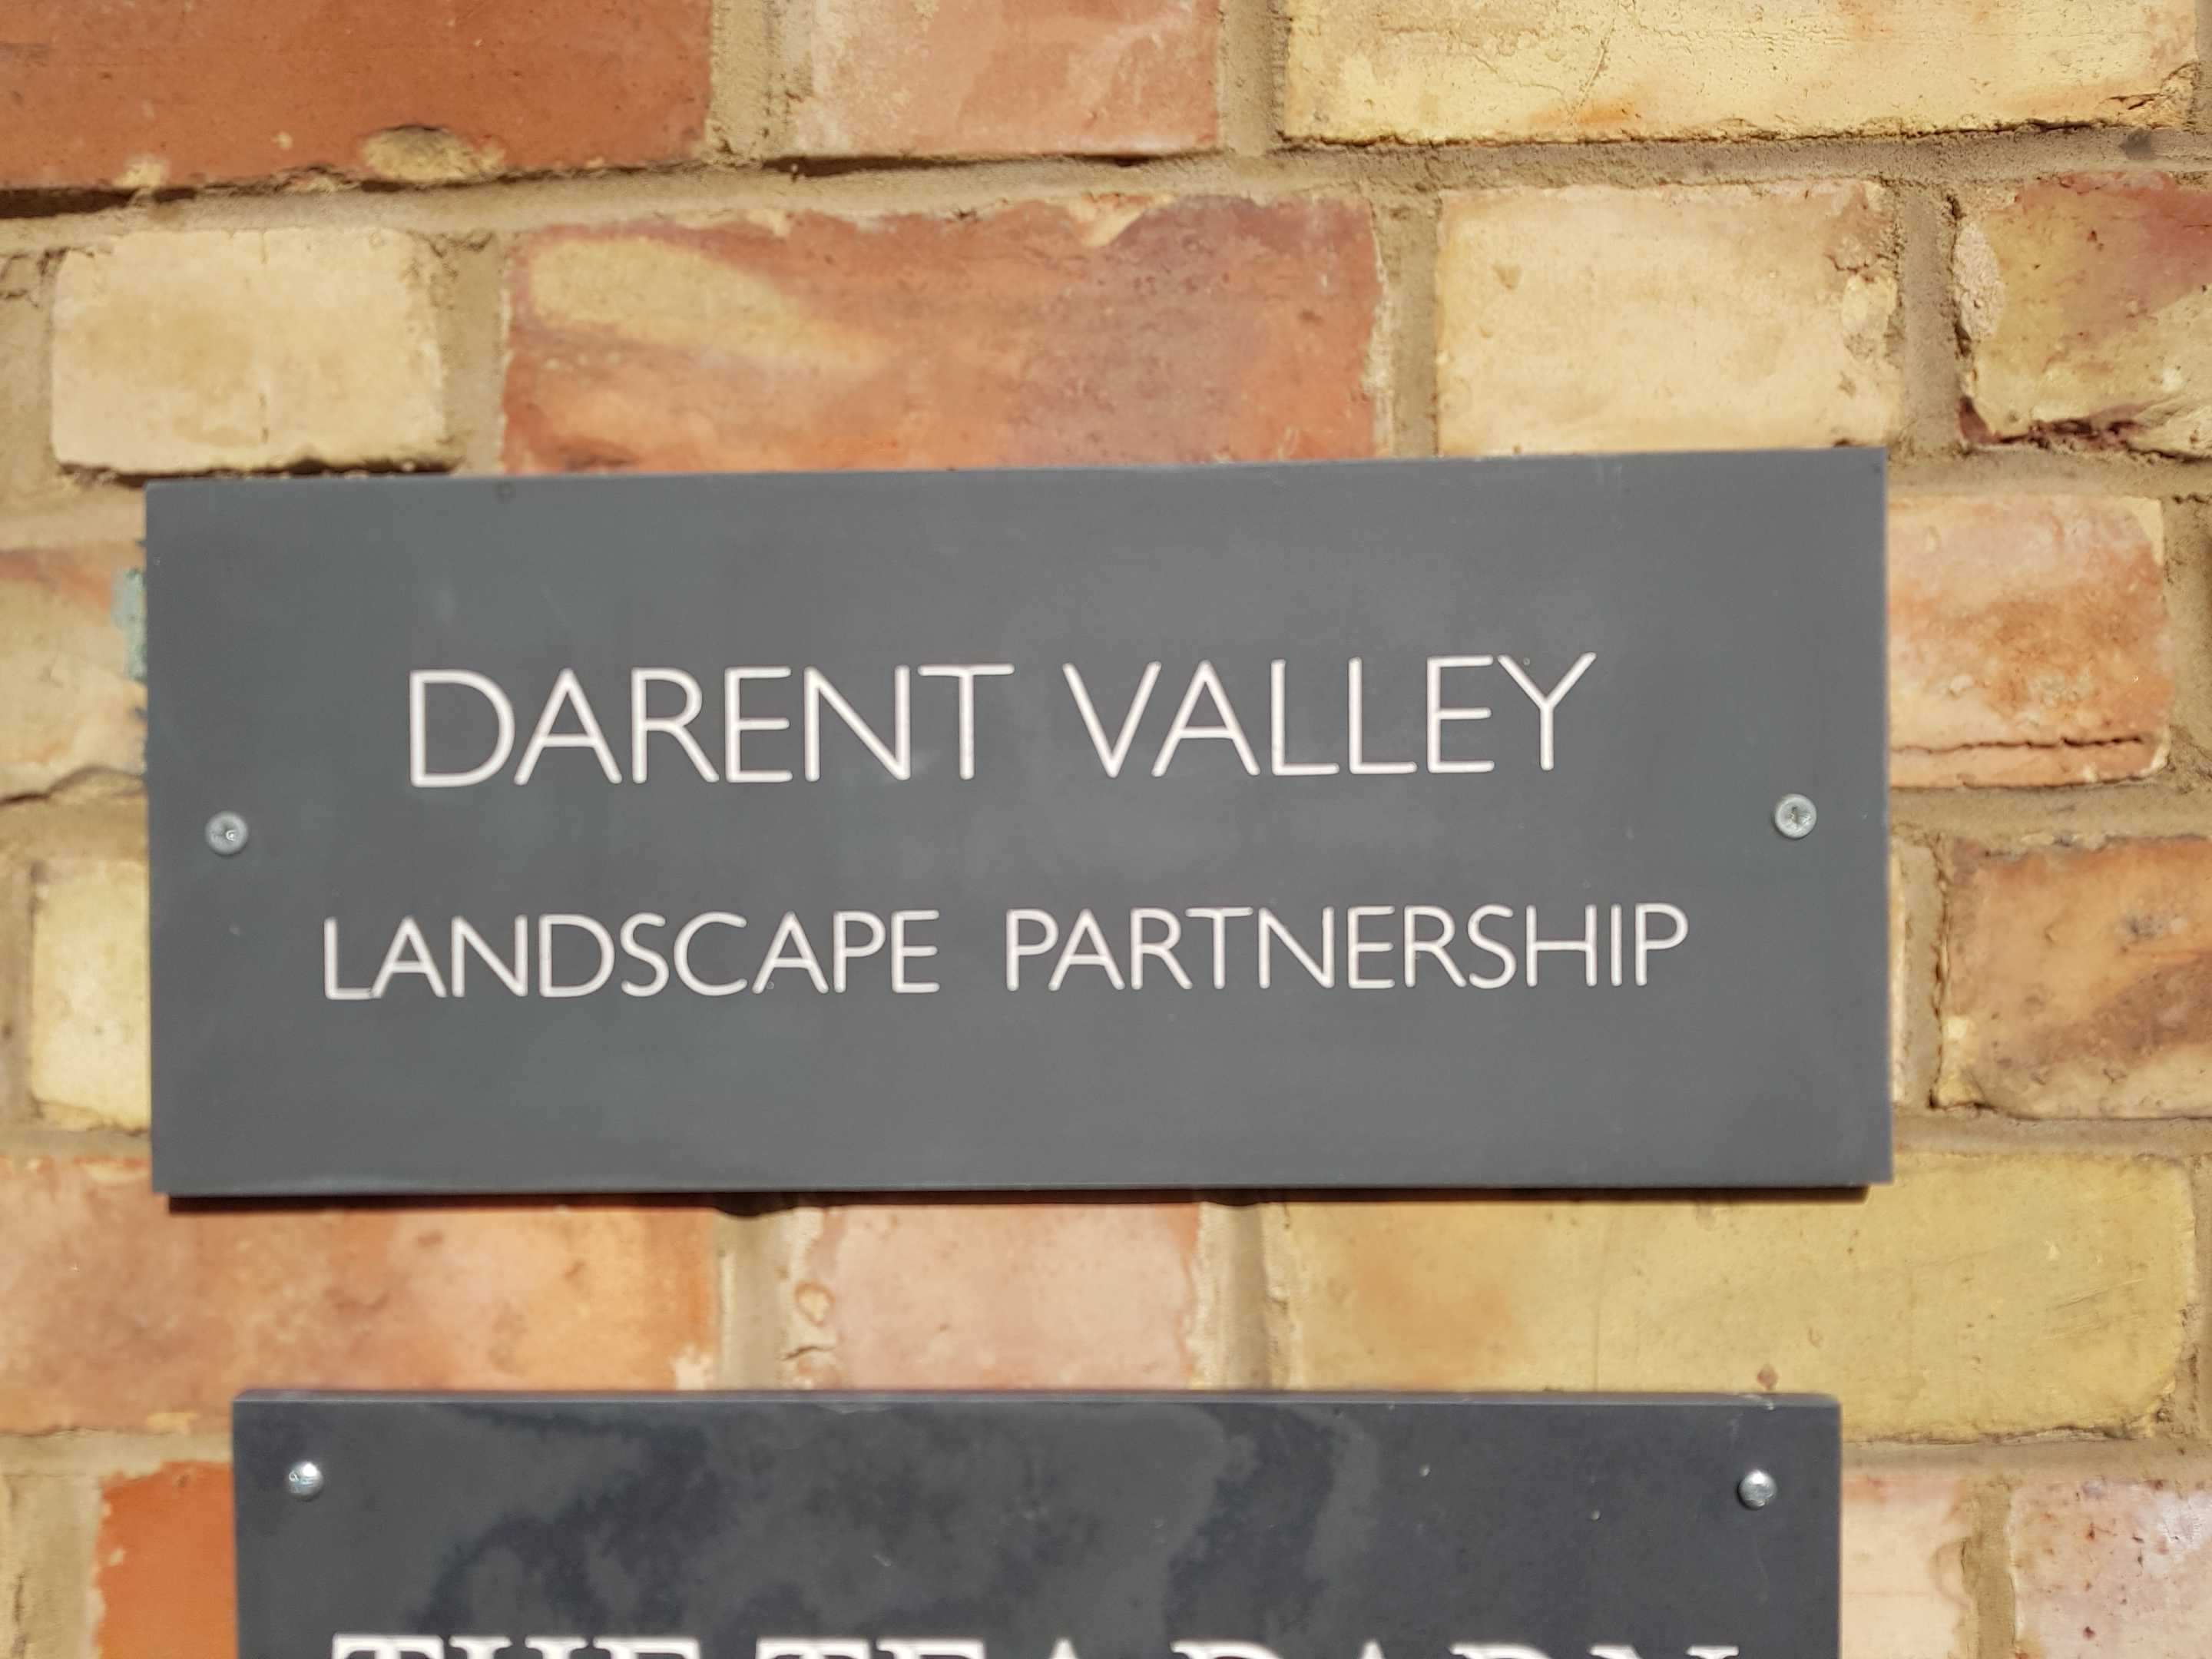 Sign at the Darent Valley Landscape Partnership Offices